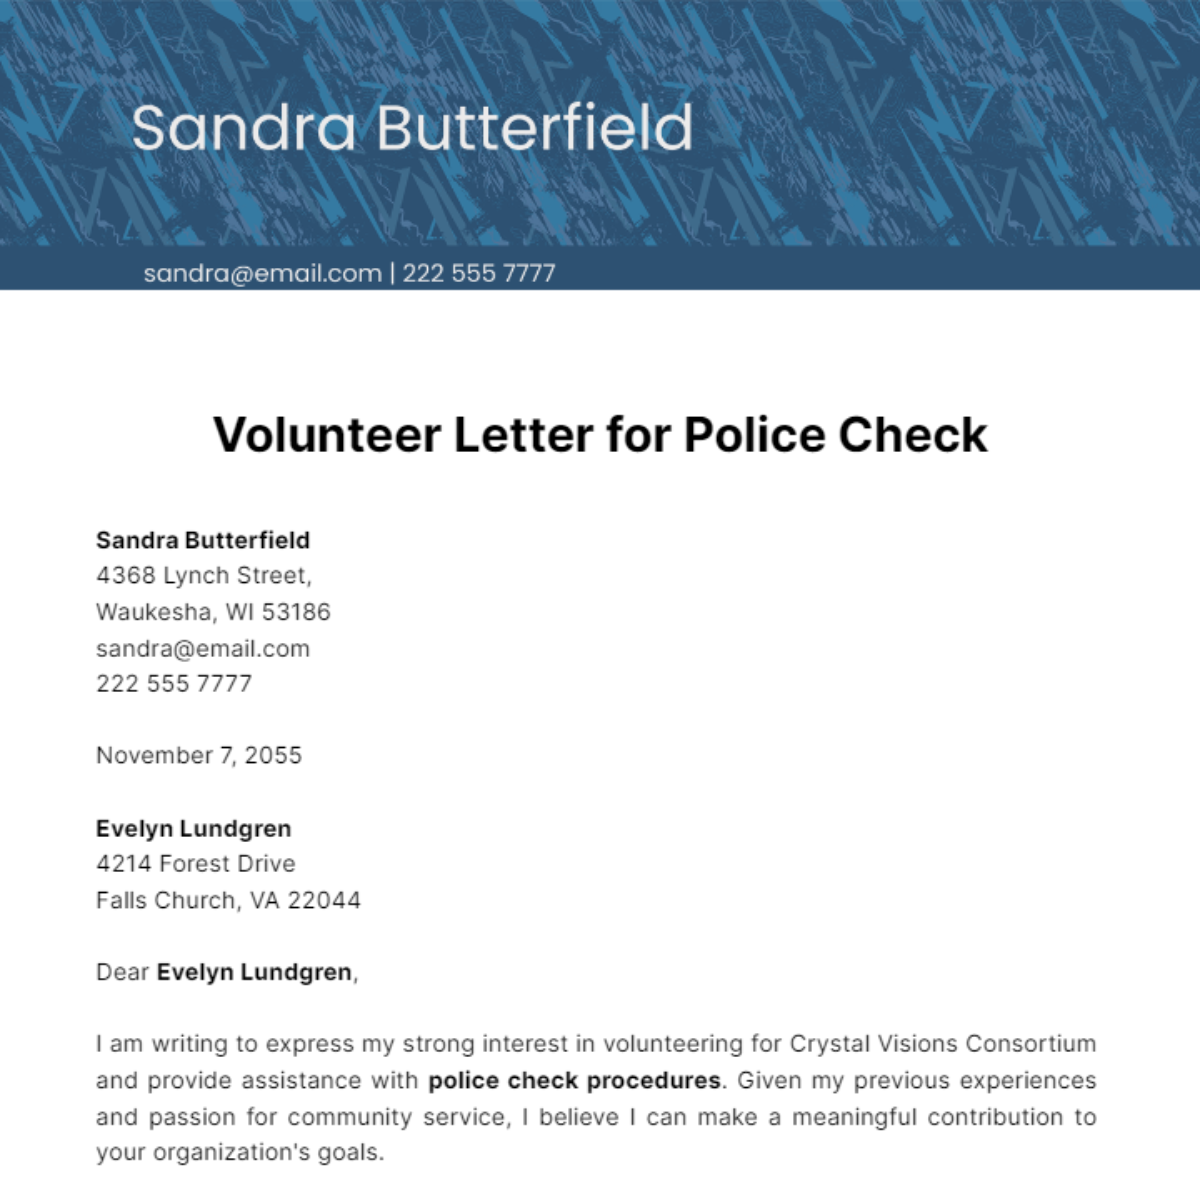 Volunteer Letter for Police Check Template